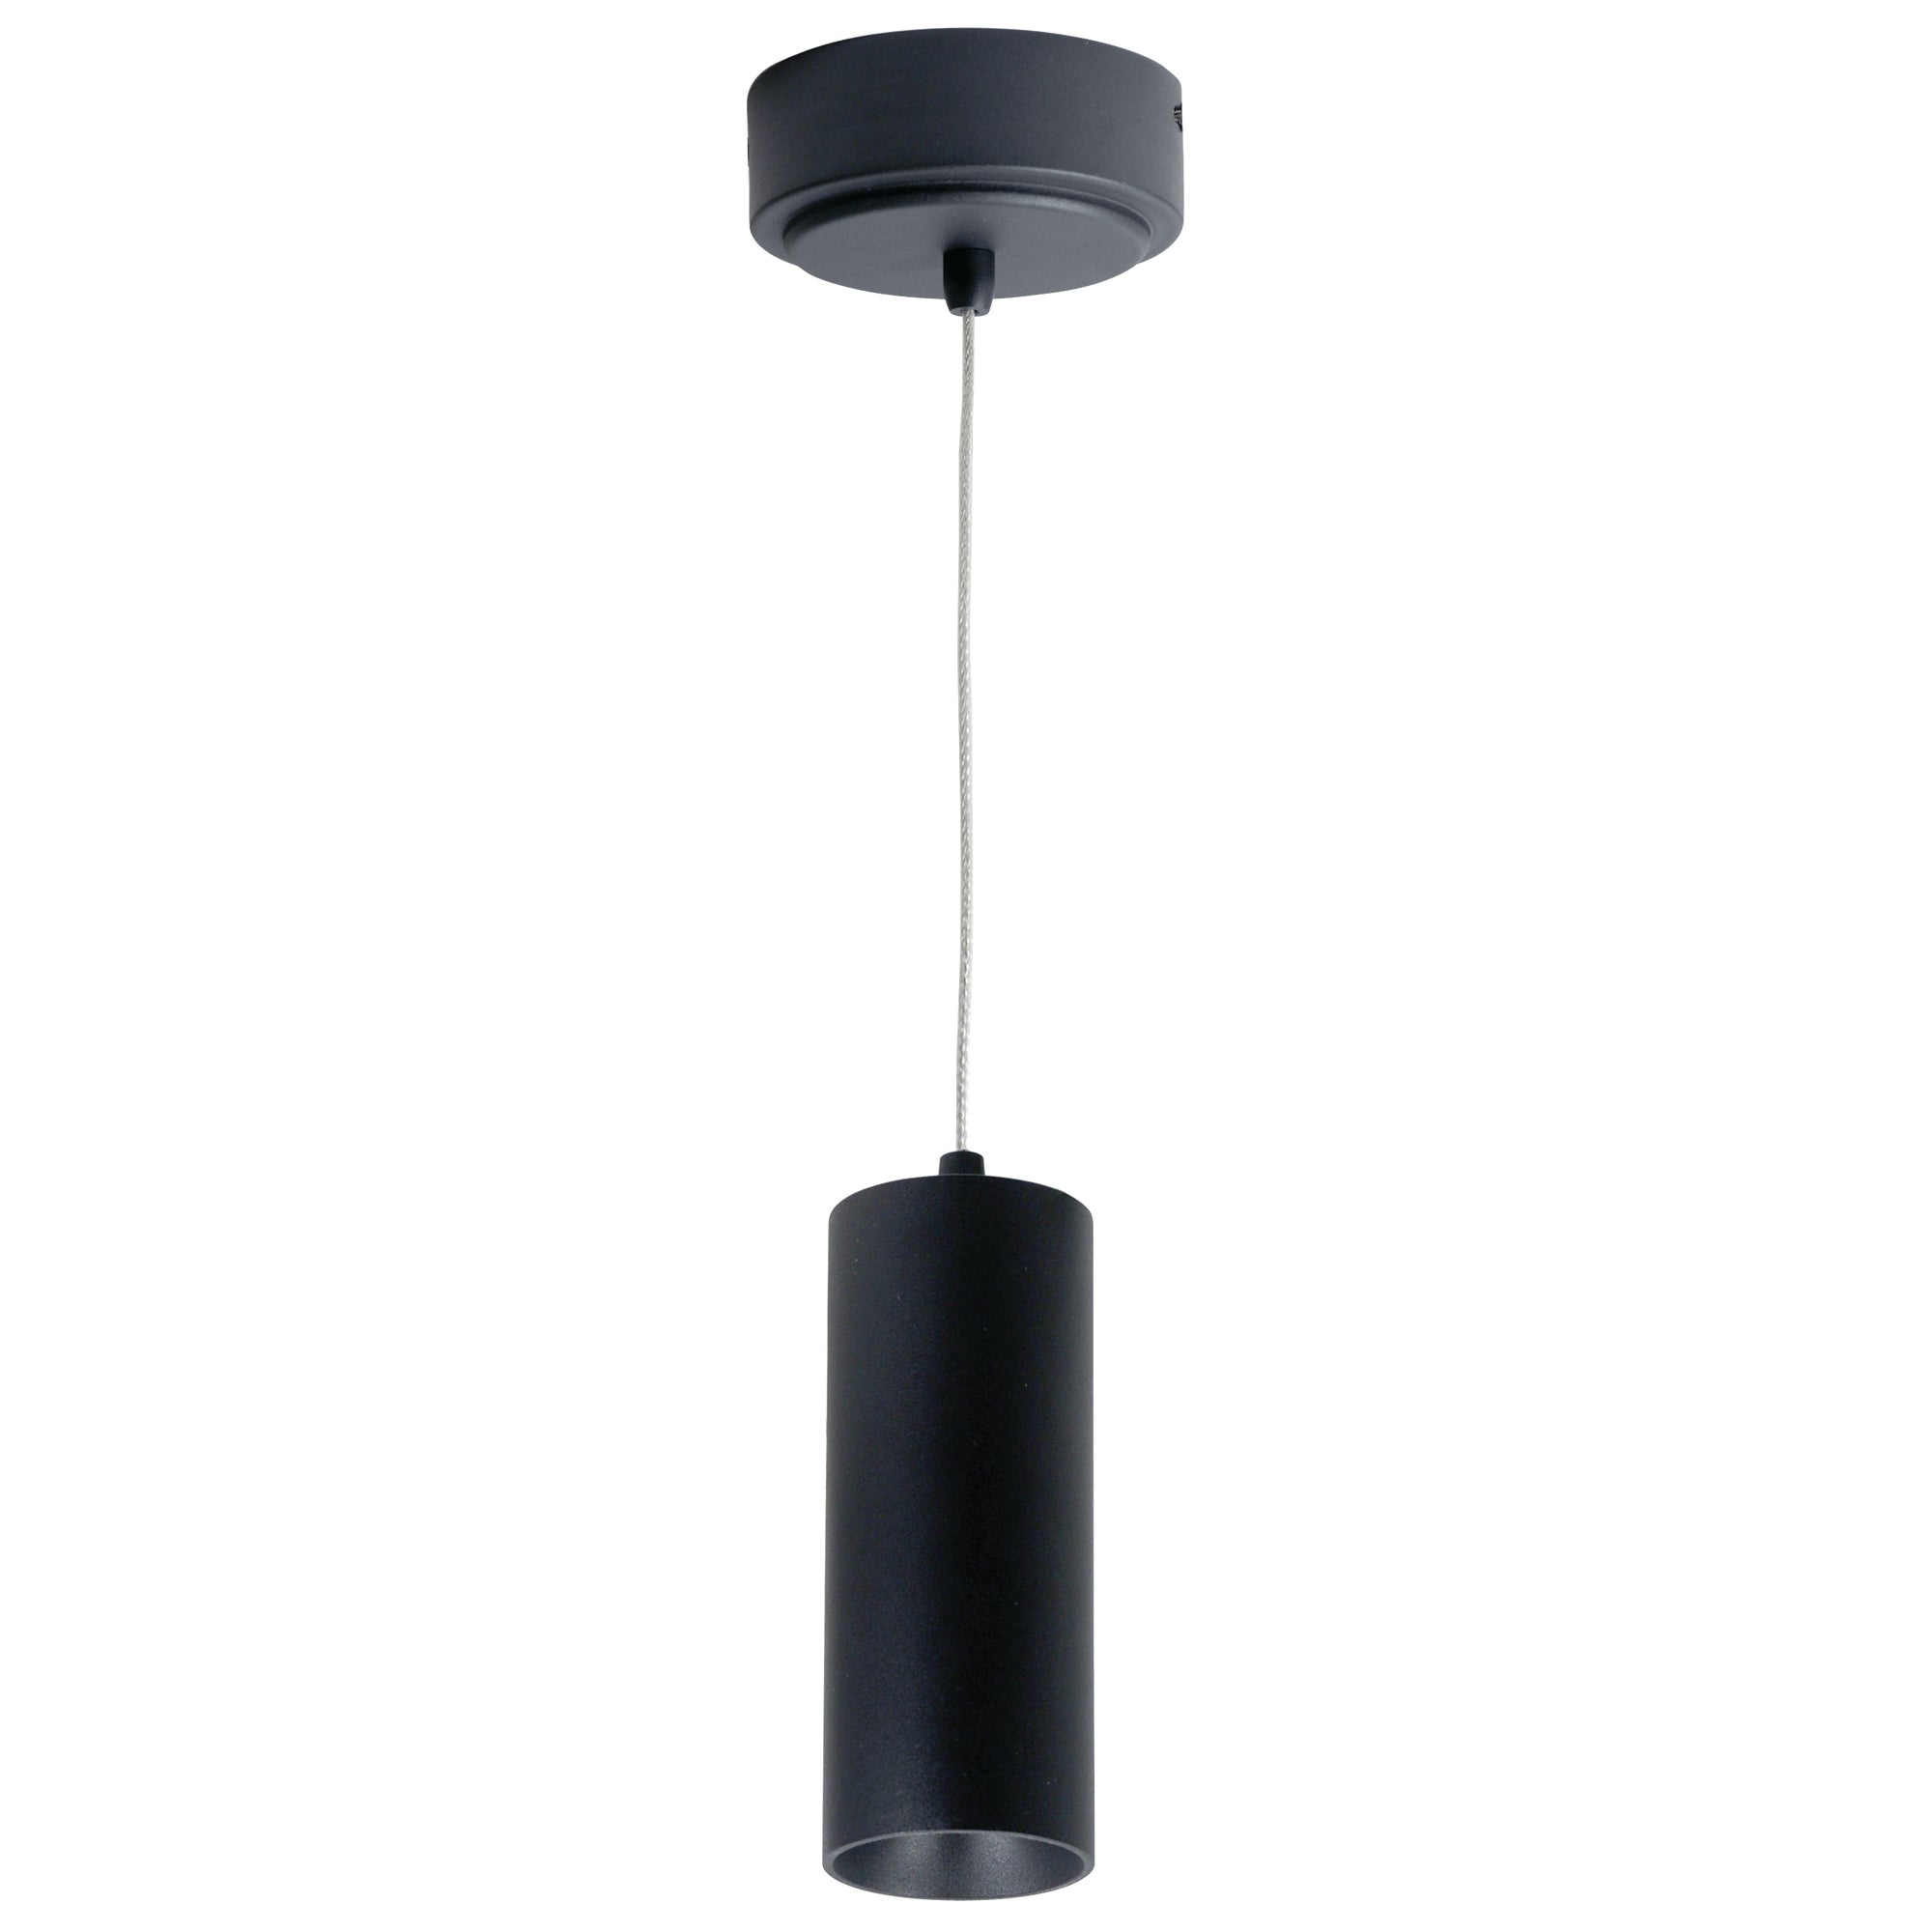 Nora Lighting LE56 - NYLM-2C27XBBLE4A - Cylinder - Black